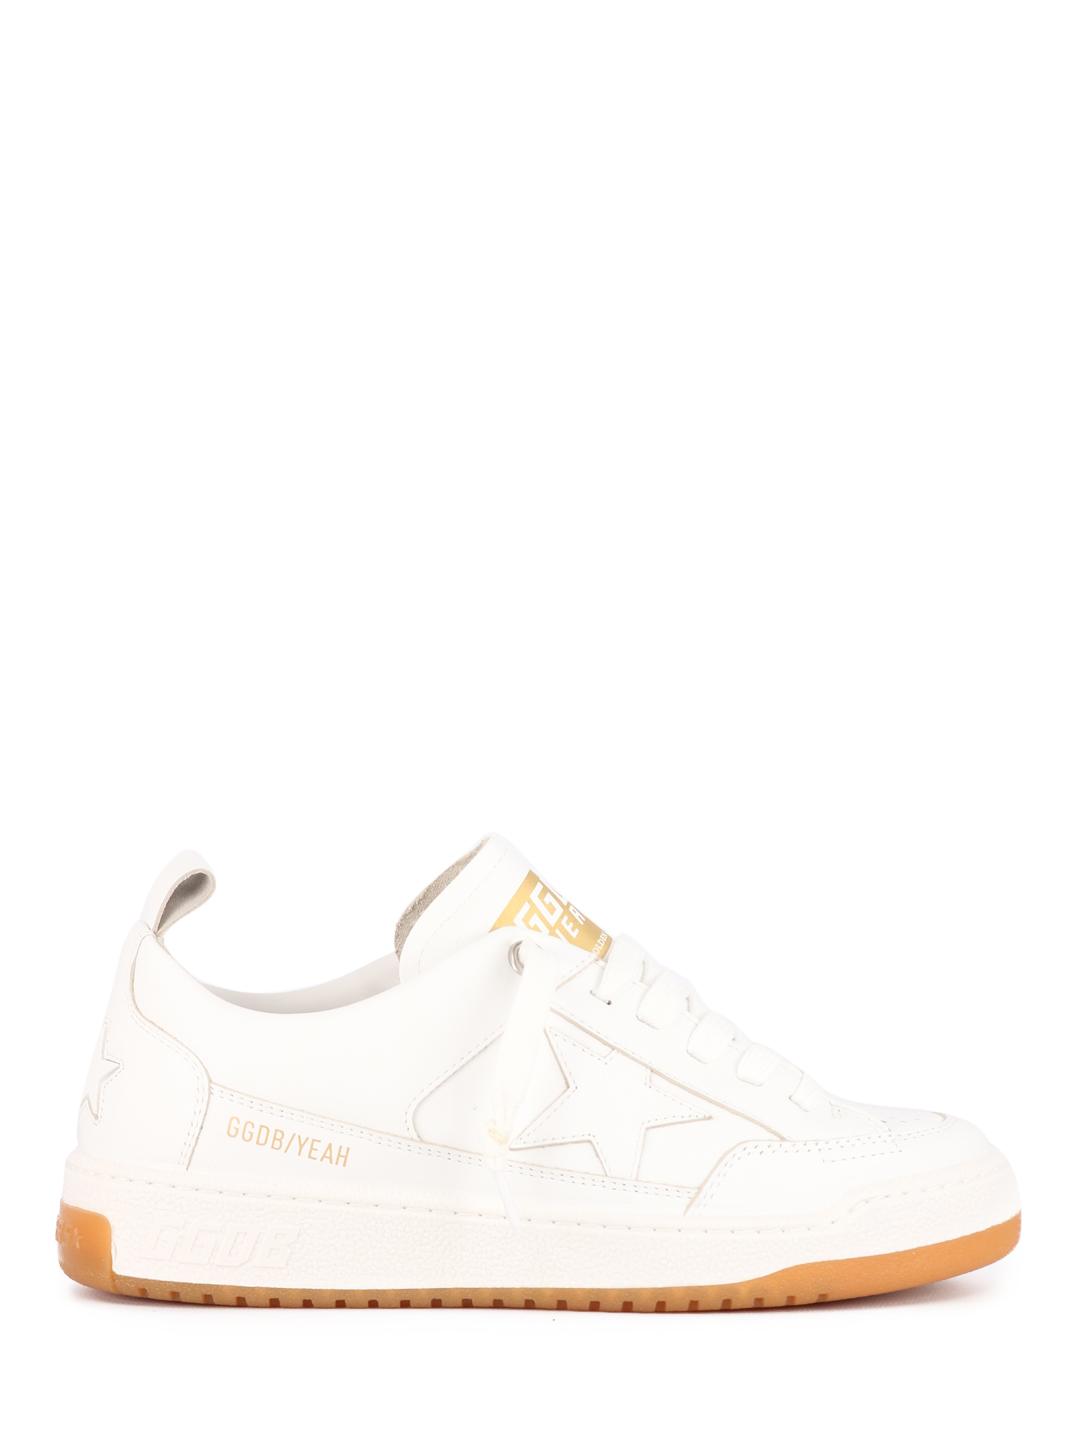 Golden Goose Leather Yeah Sneakers in White | Lyst